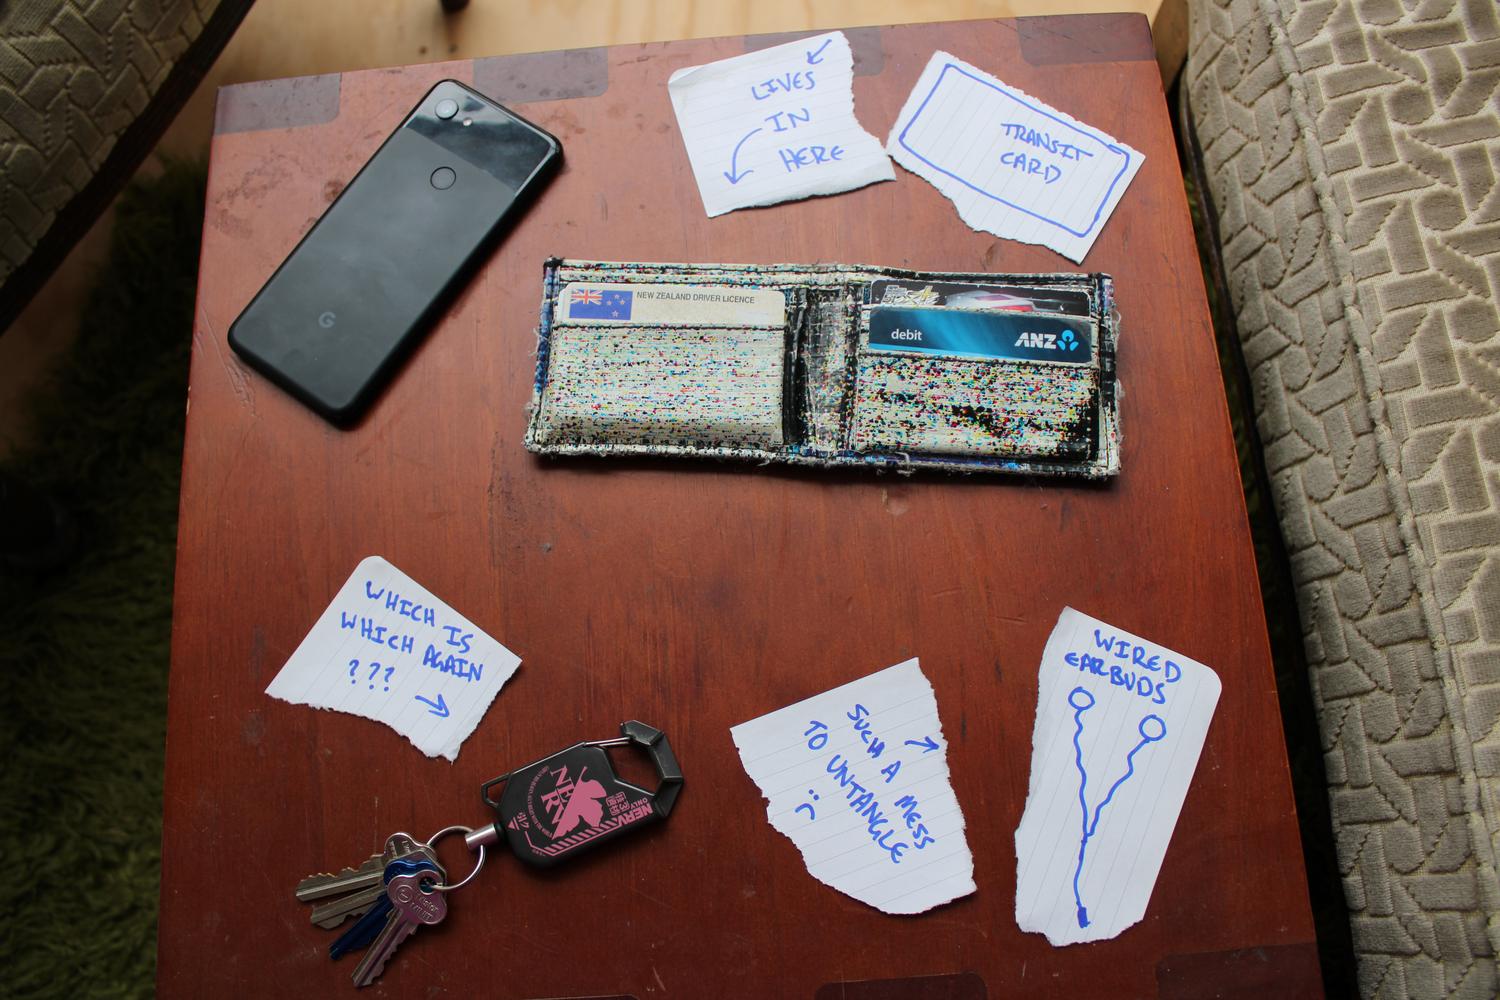 An aerial photo of a table containing items I carry each day, with pieces of paper beside each item describing the problems with each. The photo contains my phone, wallet, keys and wired earbuds. I didn't actually have the wired earbuds anymore so I've just drawn a picture to represent them.